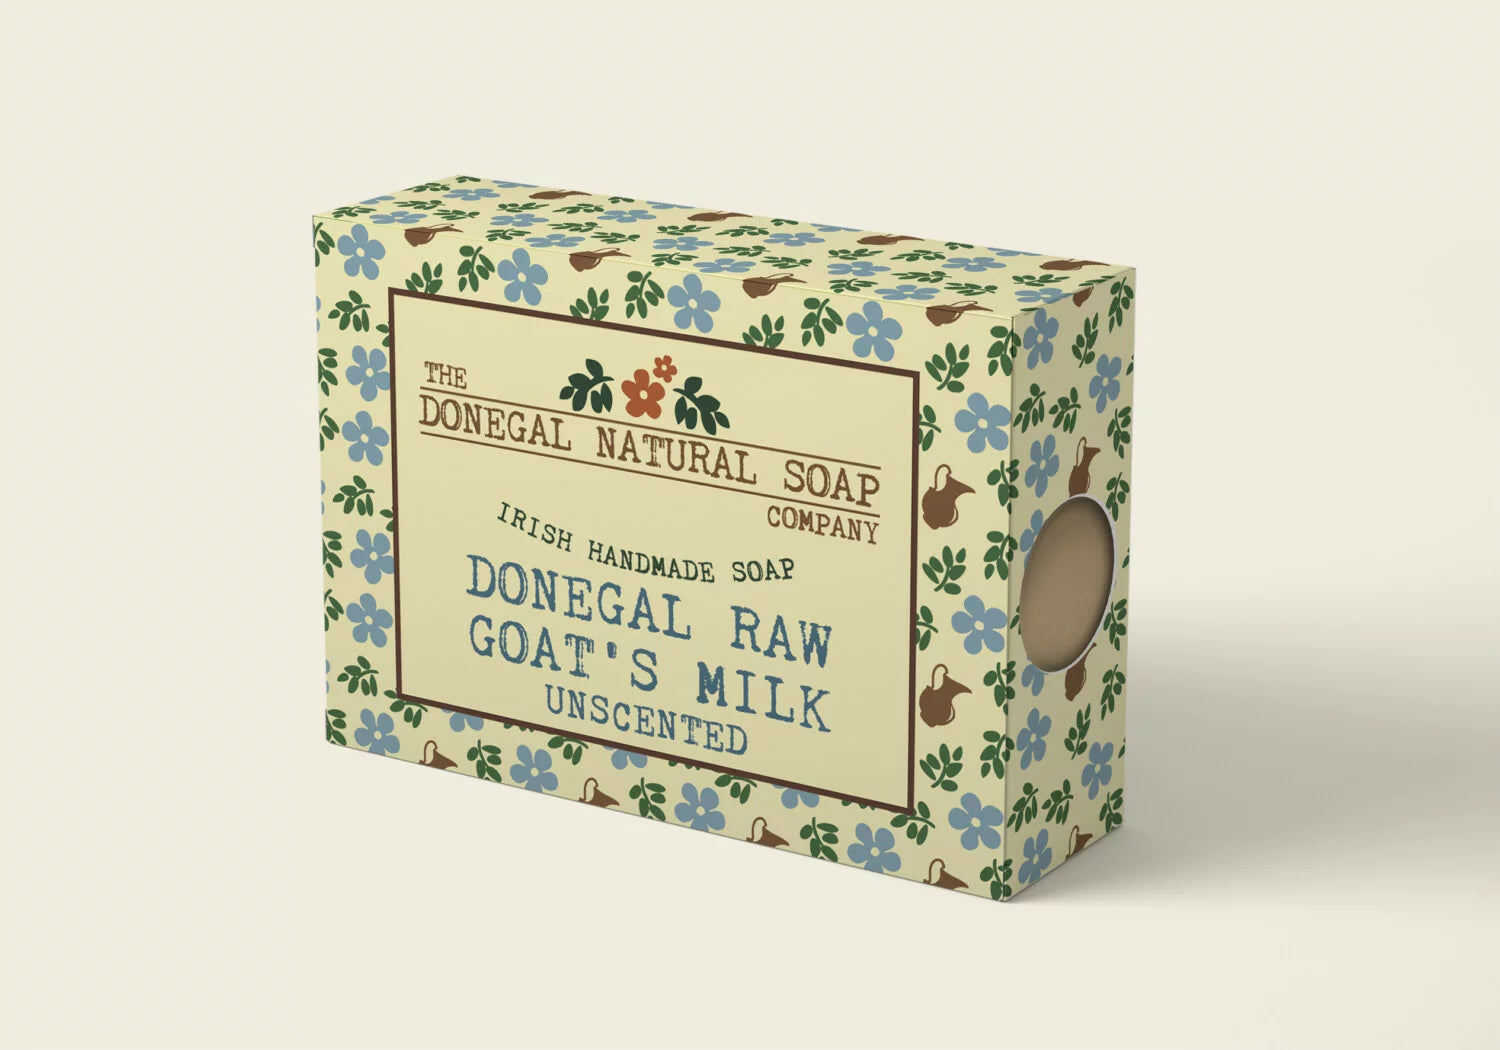 Donegal Raw Goats Milk Soap by The Donegal Natural Soap Company